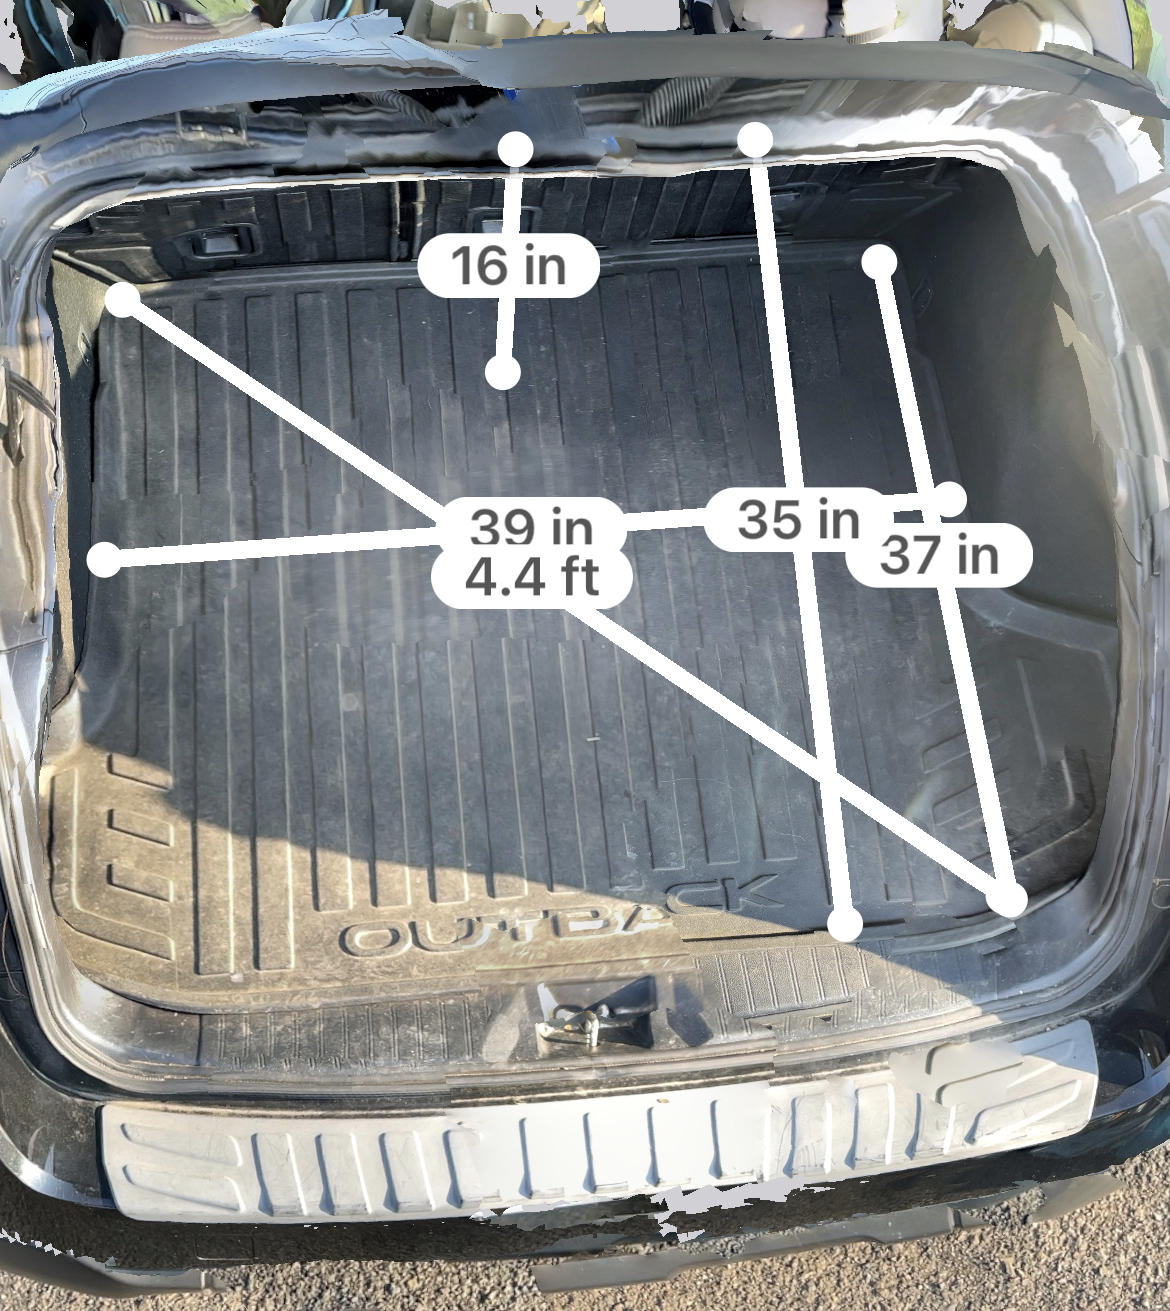 3D Scans + Dimensions of 4Door Bronco Cargo Area (and vs Outback